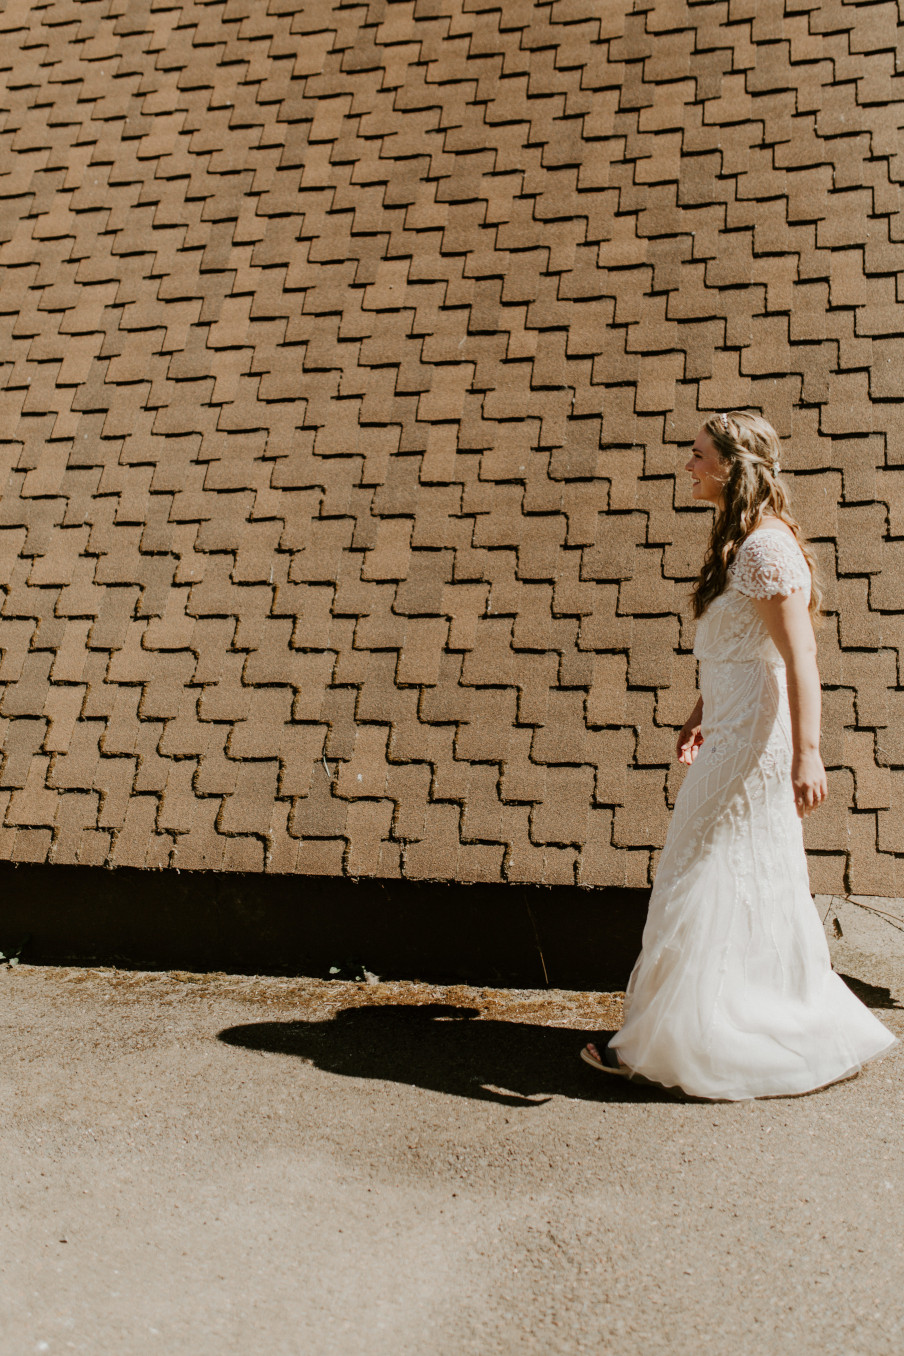 Hannah approaches Dan in Corvallis, Oregon during their Oregon Adventure. Intimate wedding photography in Corvallis Oregon by Sienna Plus Josh.